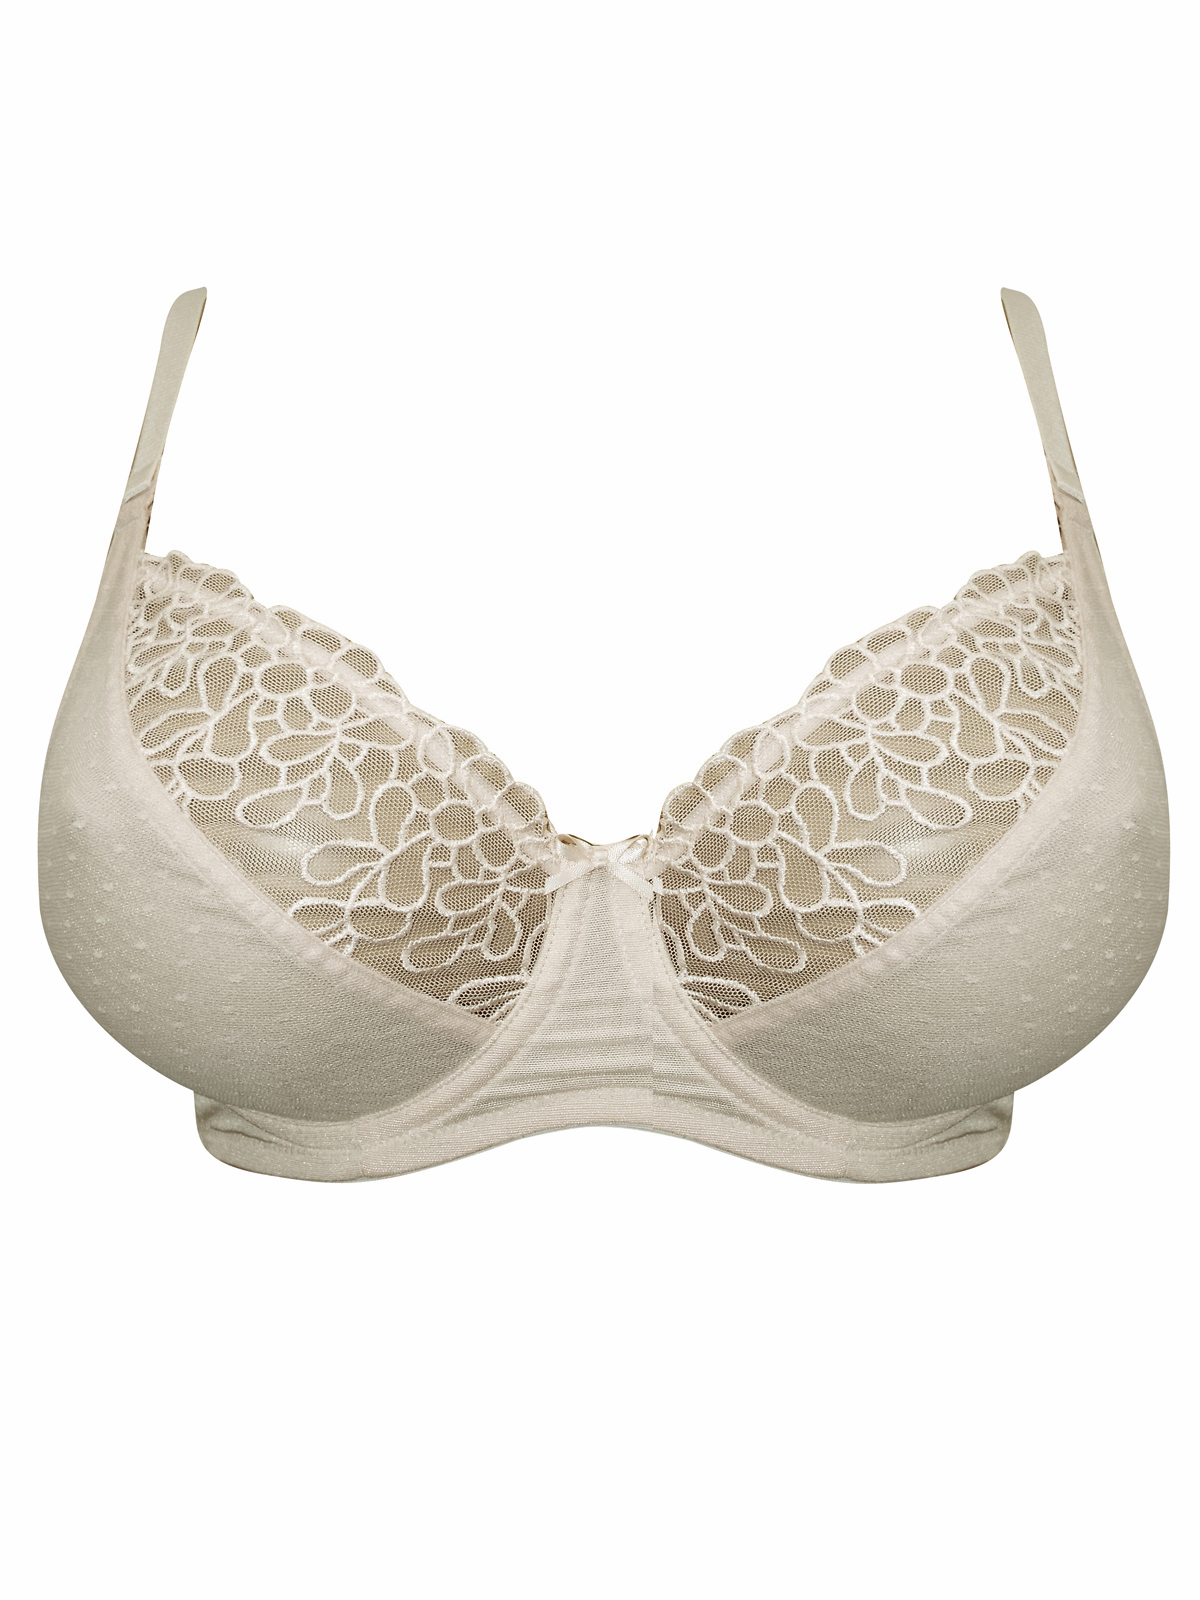 Marks And Spencer Mand5 Assorted Underwired Plain And Lace Bras Size 